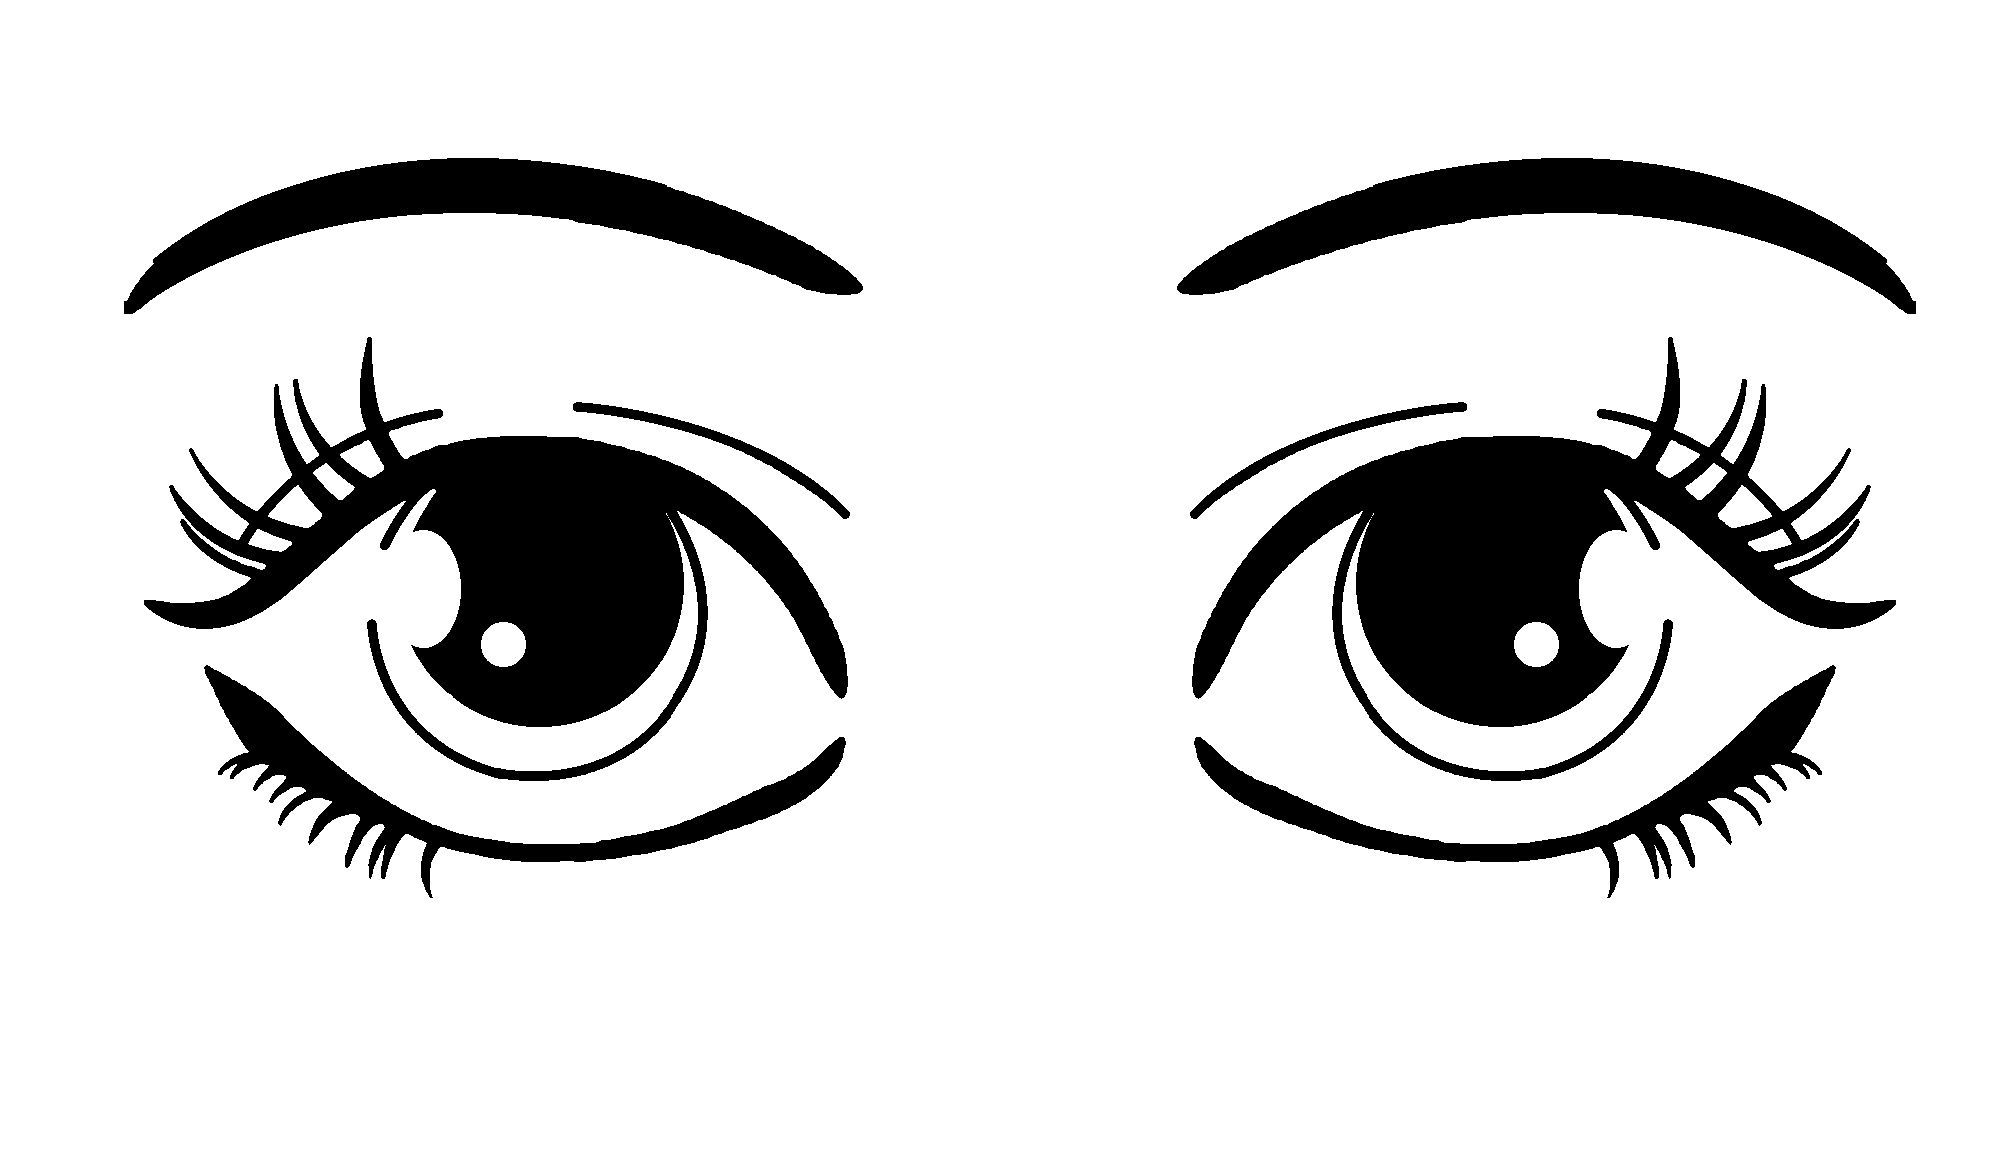 Eyes Looking Clipart Image Picture Becuo. Eyes clipart, Cartoon eyes, Cute cartoon eyes